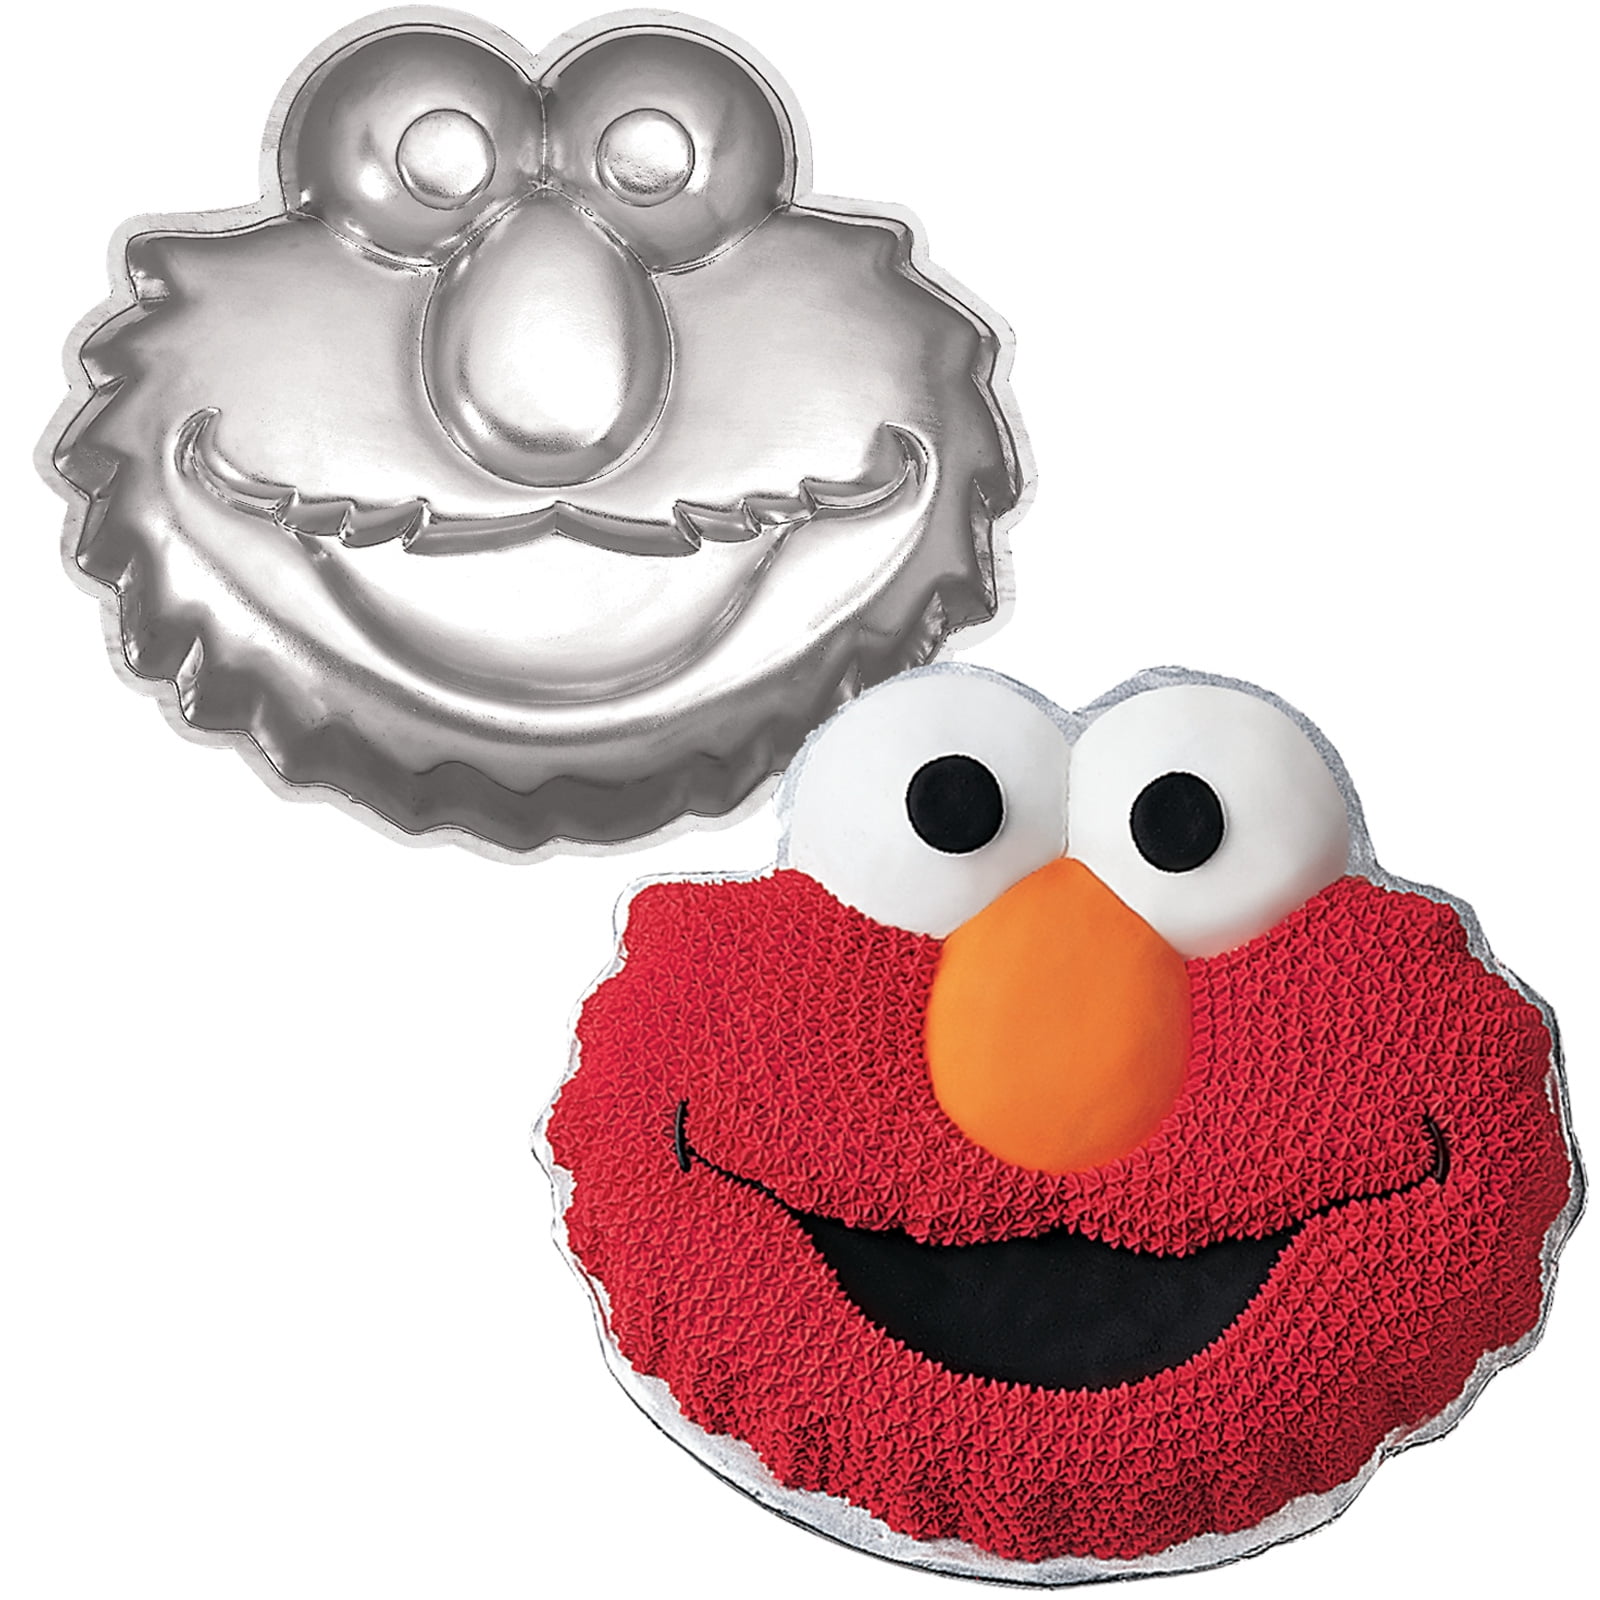 Details about   Wilton ELMO DANCING WITH ICE CREAM CONE cake pan SESAME ST MUPPET metal mold tin 